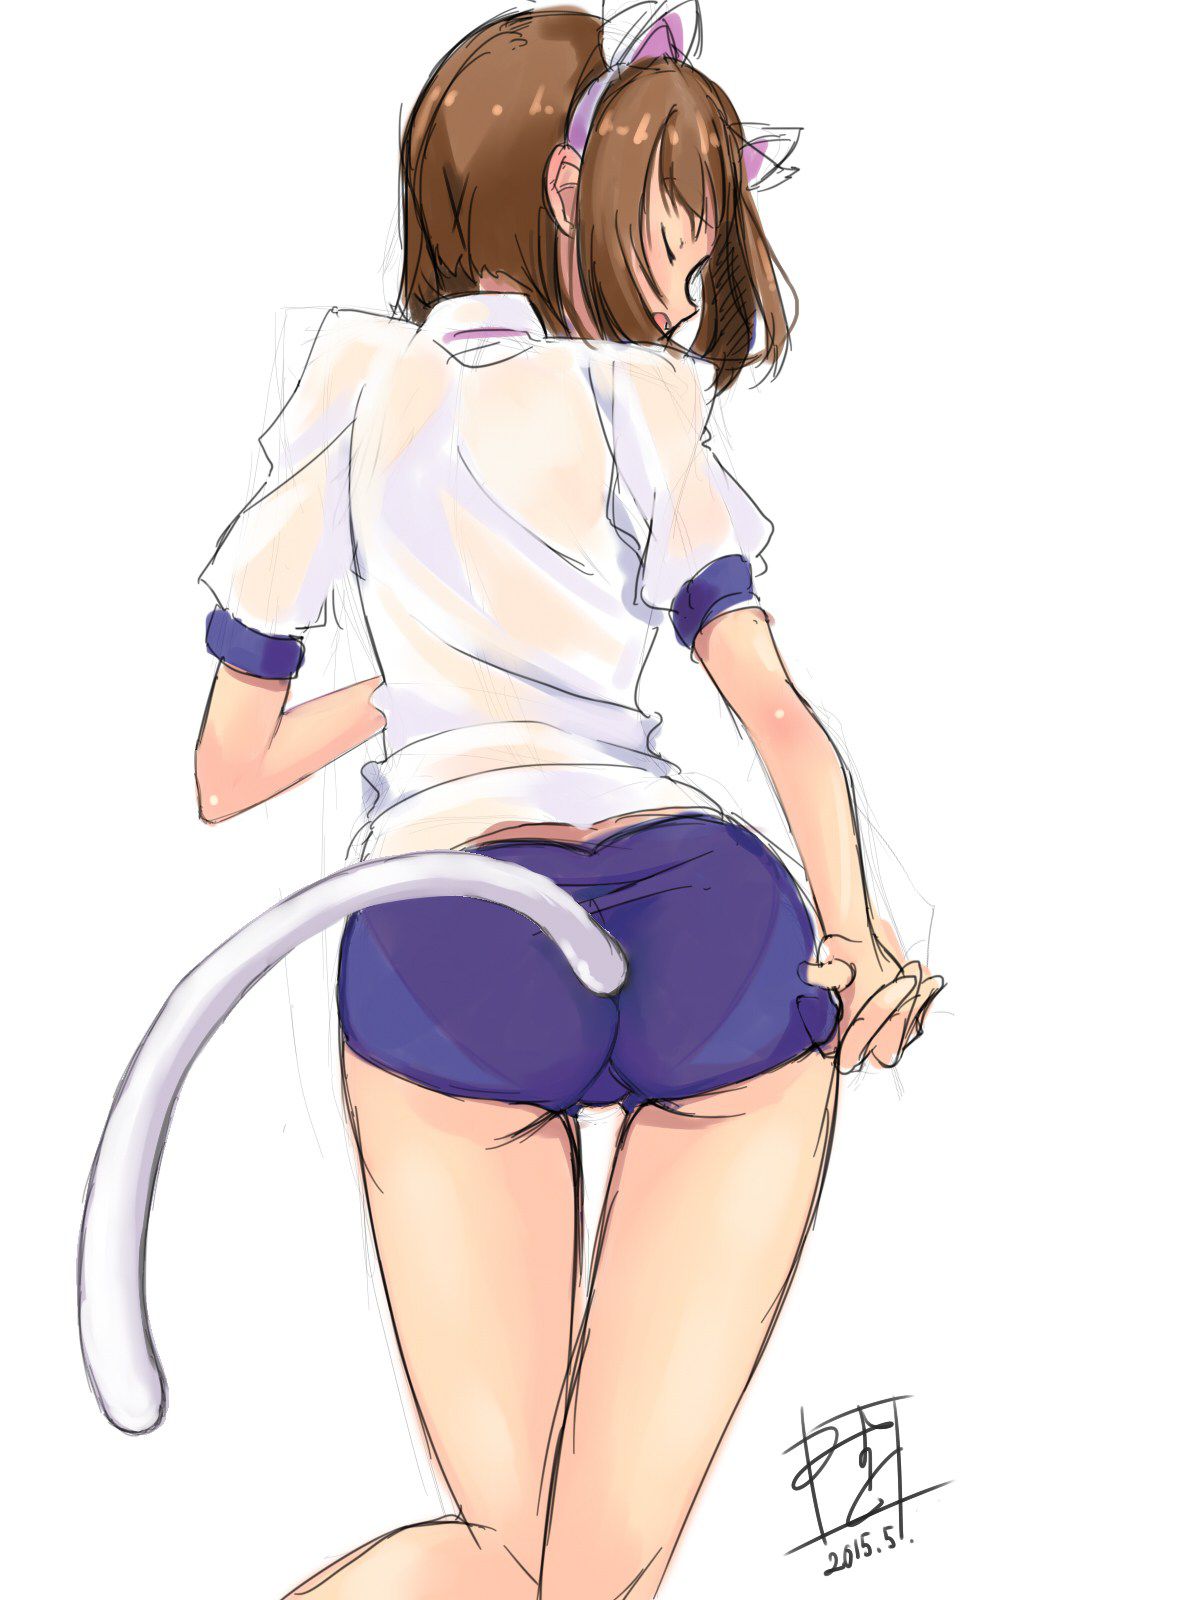 [48 pictures] Cinderella girls Maekawa in very erotic pictures! Part 3 36